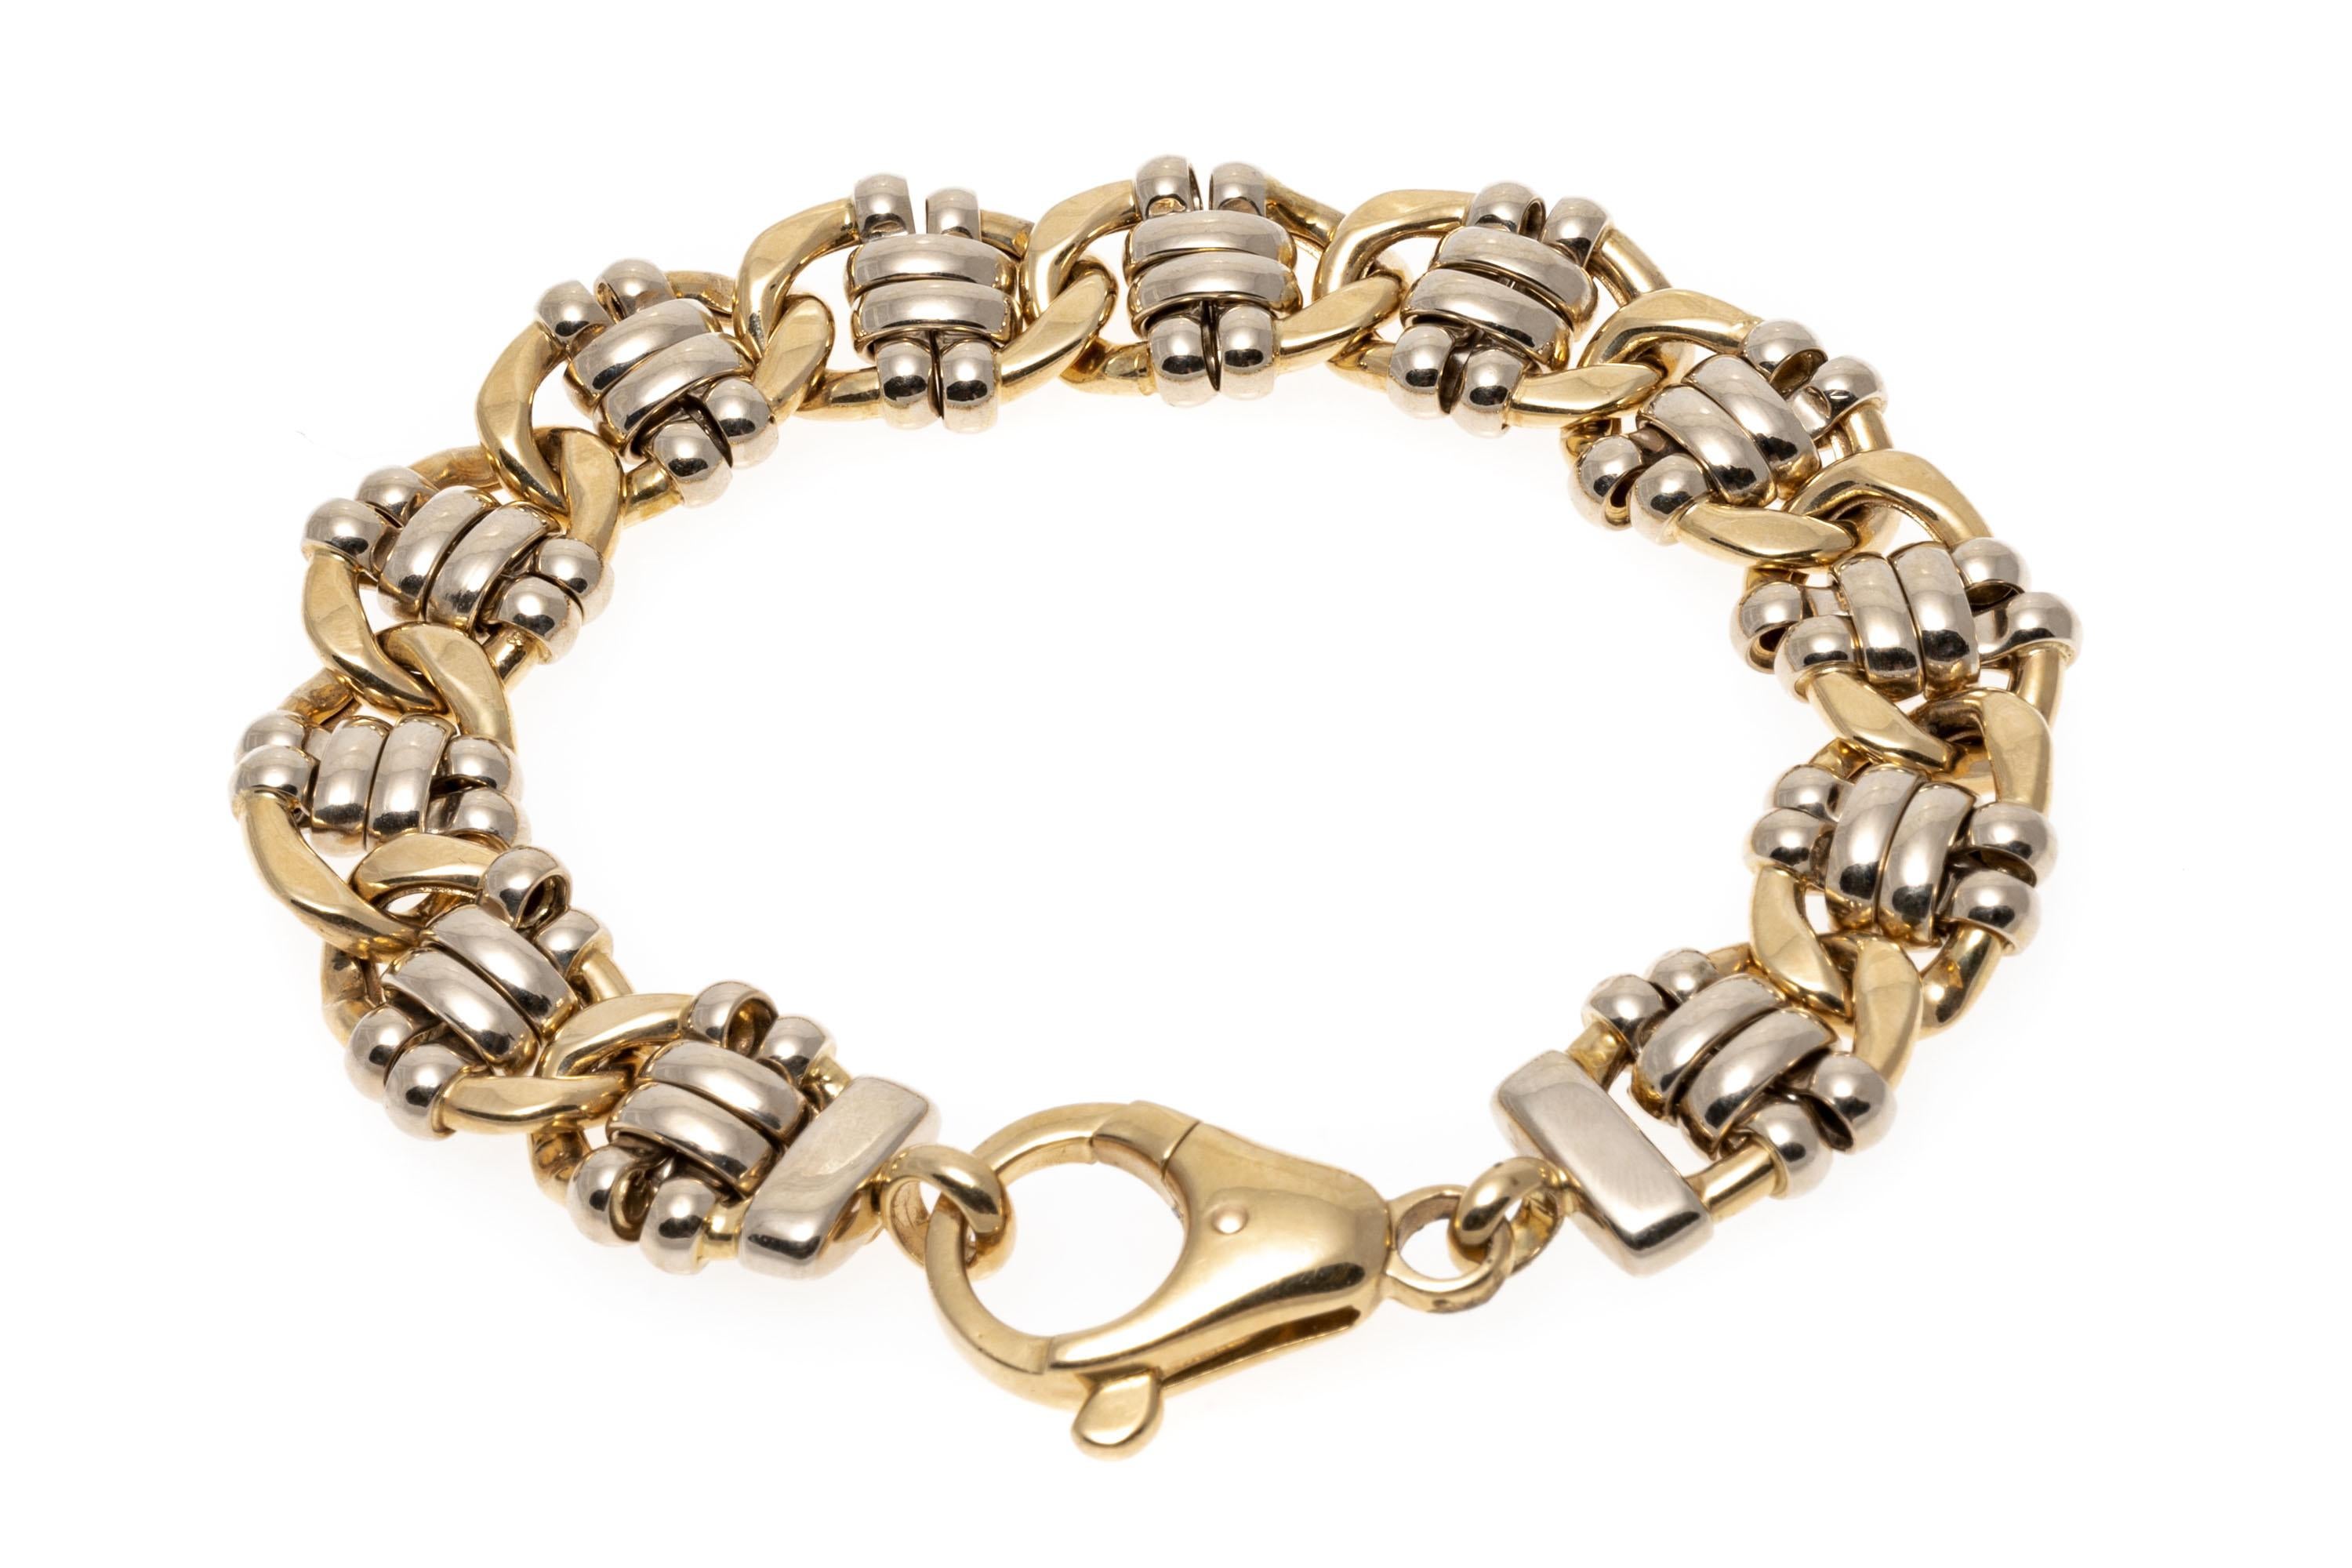 14k Two Tone Lovely High Polished Half Curb And Ribbed Link Bracelet.
This lovely bracelet is a high polished yellow gold jumbo half curb link bracelet, set in the center with high polished ribbed white gold center links. The bracelet has a jumbo